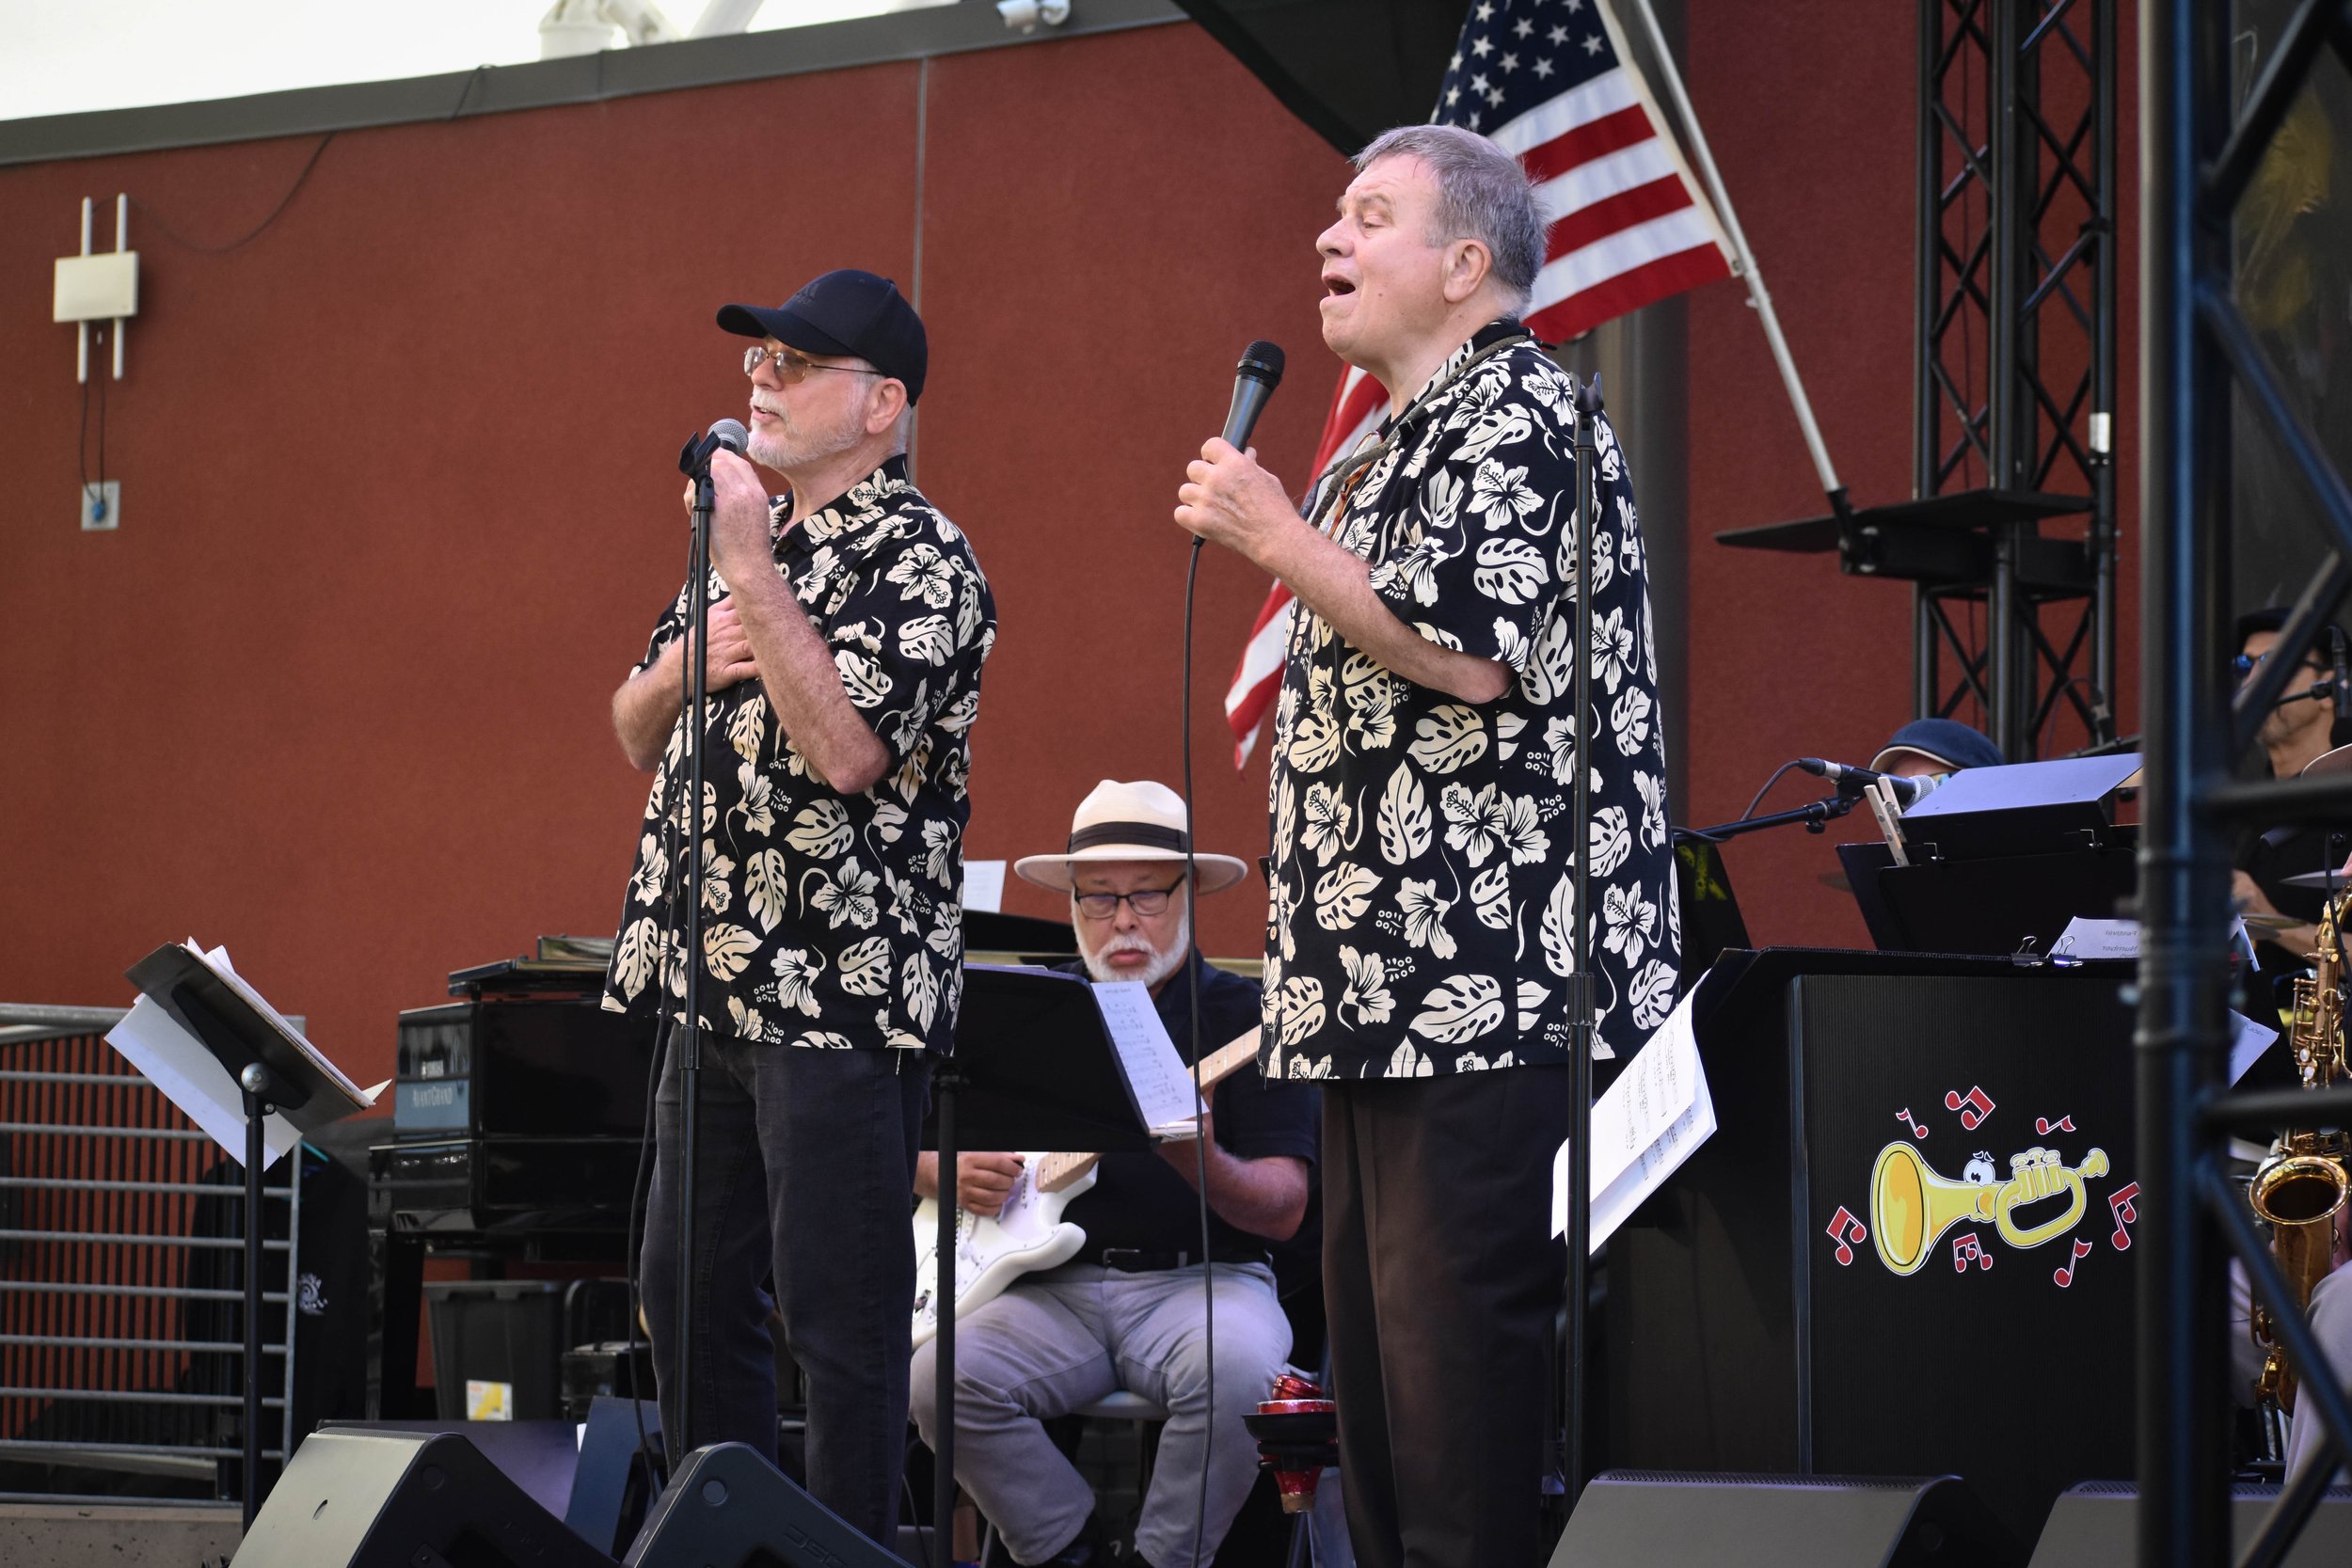 07-10-2023 Laguna Jazz Band concert at Pageant of the Masters by Peyton Webster26-28.jpg